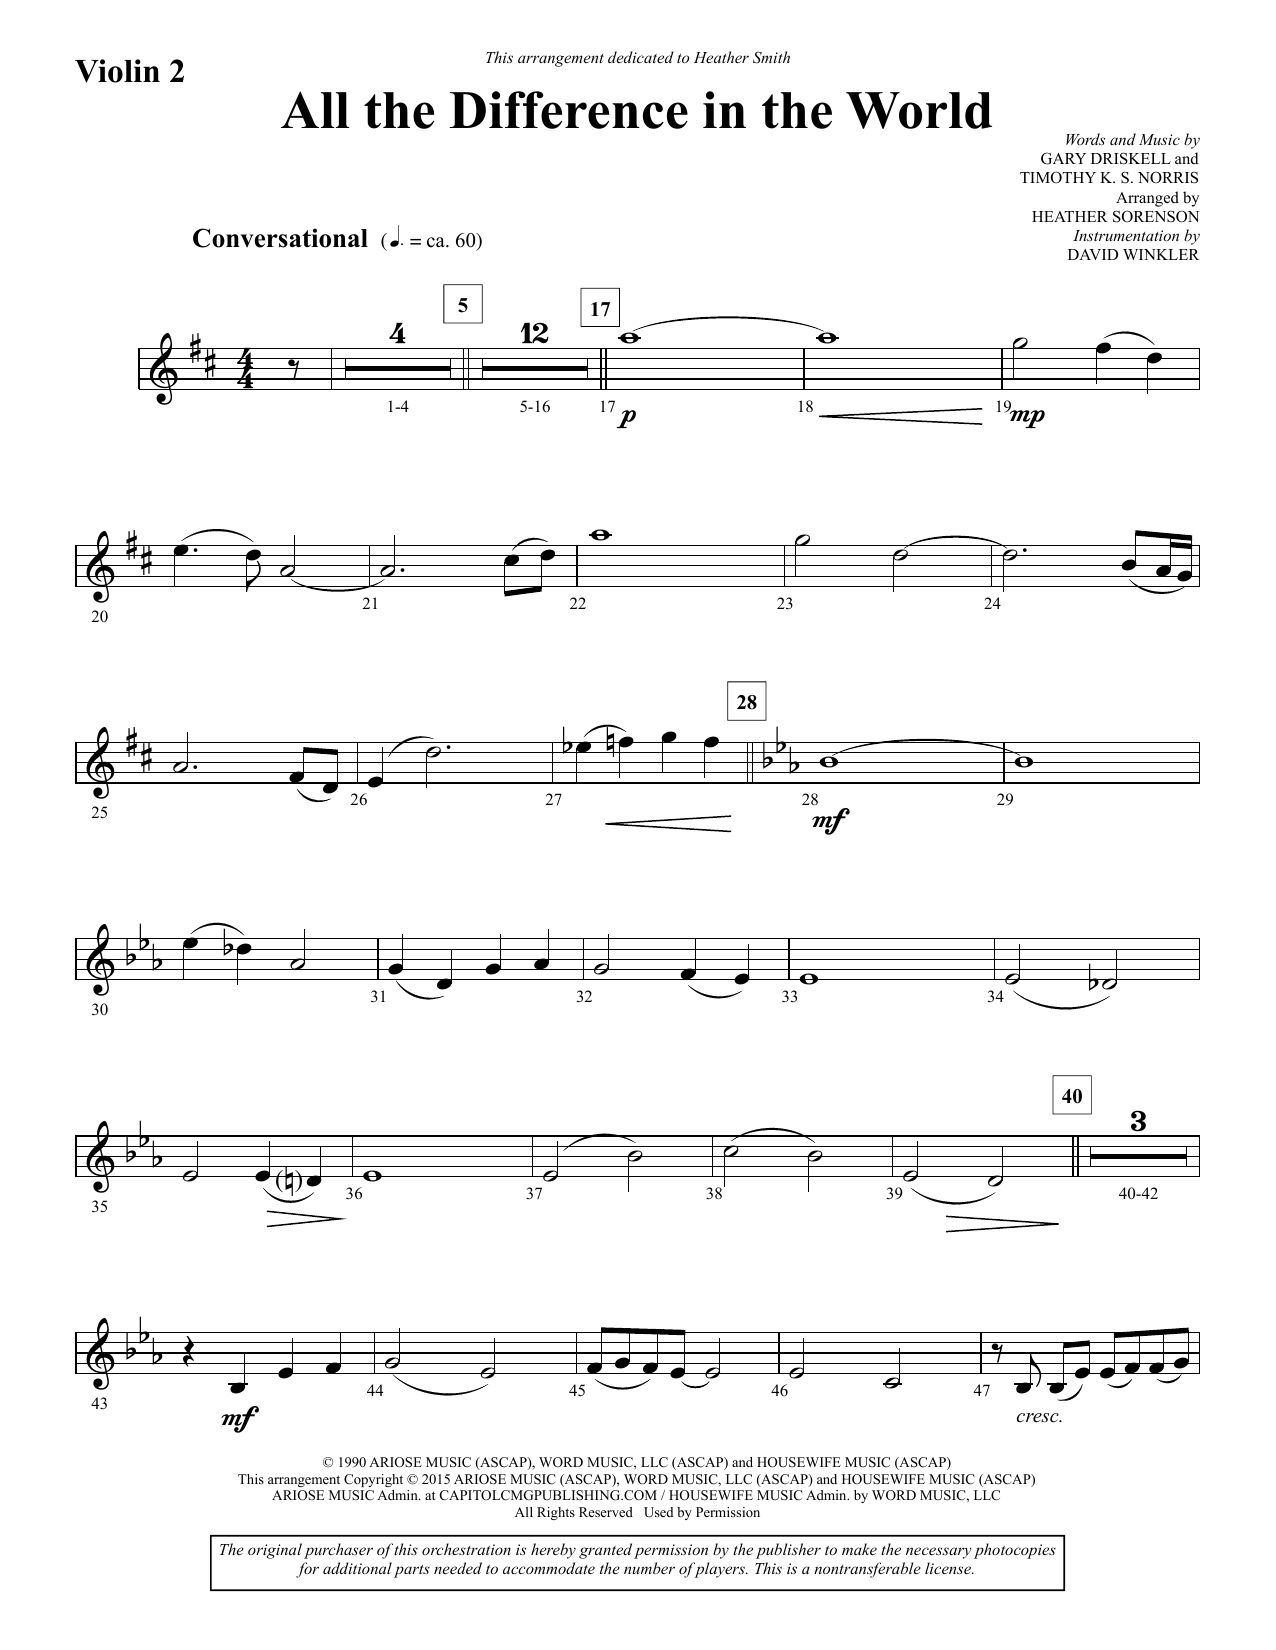 Heather Sorenson All the Difference in the World - Violin 2 sheet music notes and chords. Download Printable PDF.